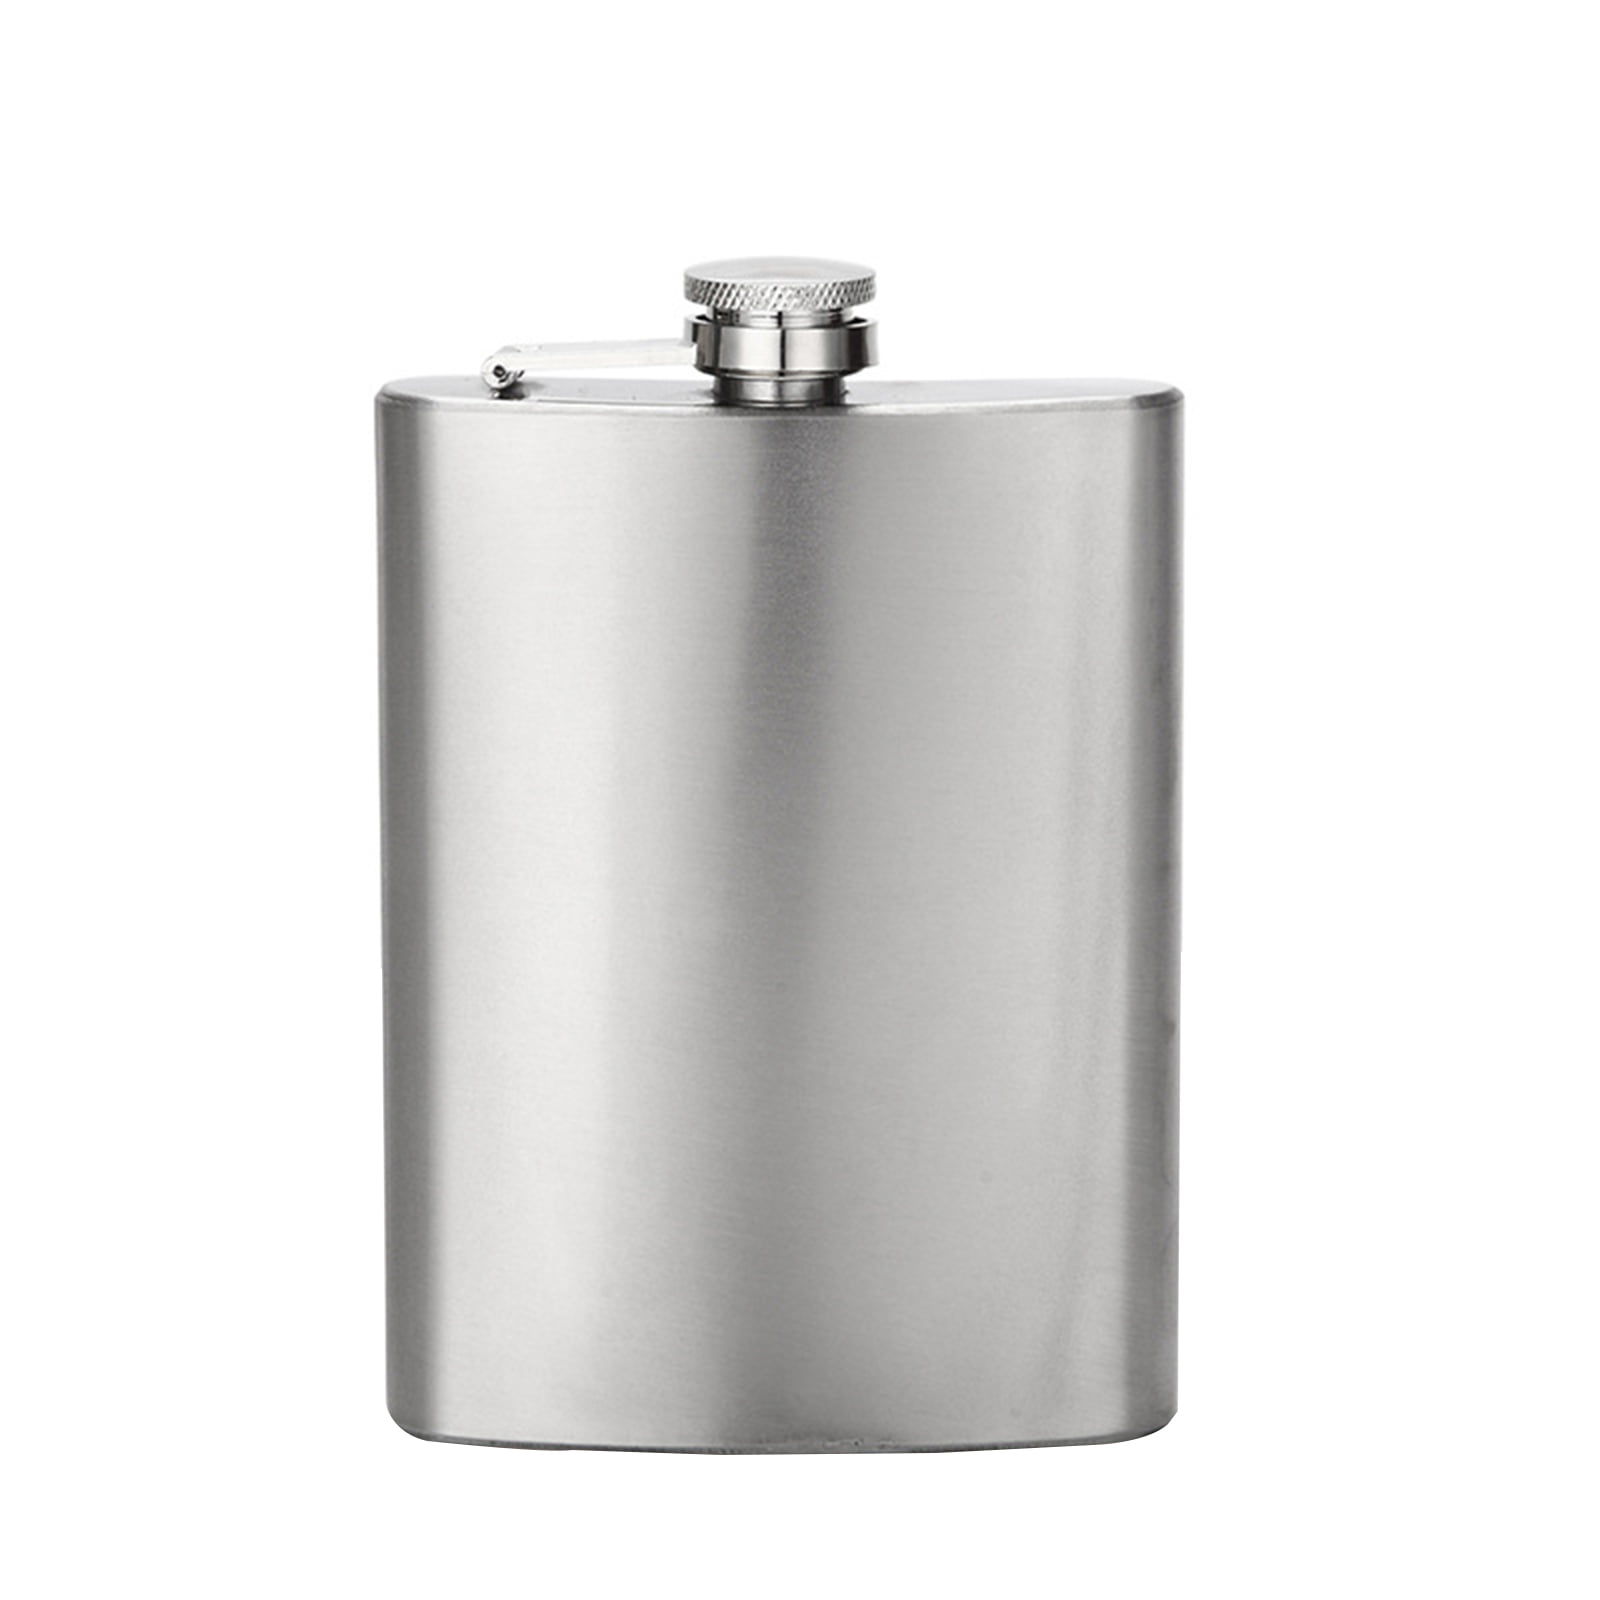 Stainless Steel Texture Rectangular Hip Flask Exquisite Portable Hip Flask Gift 